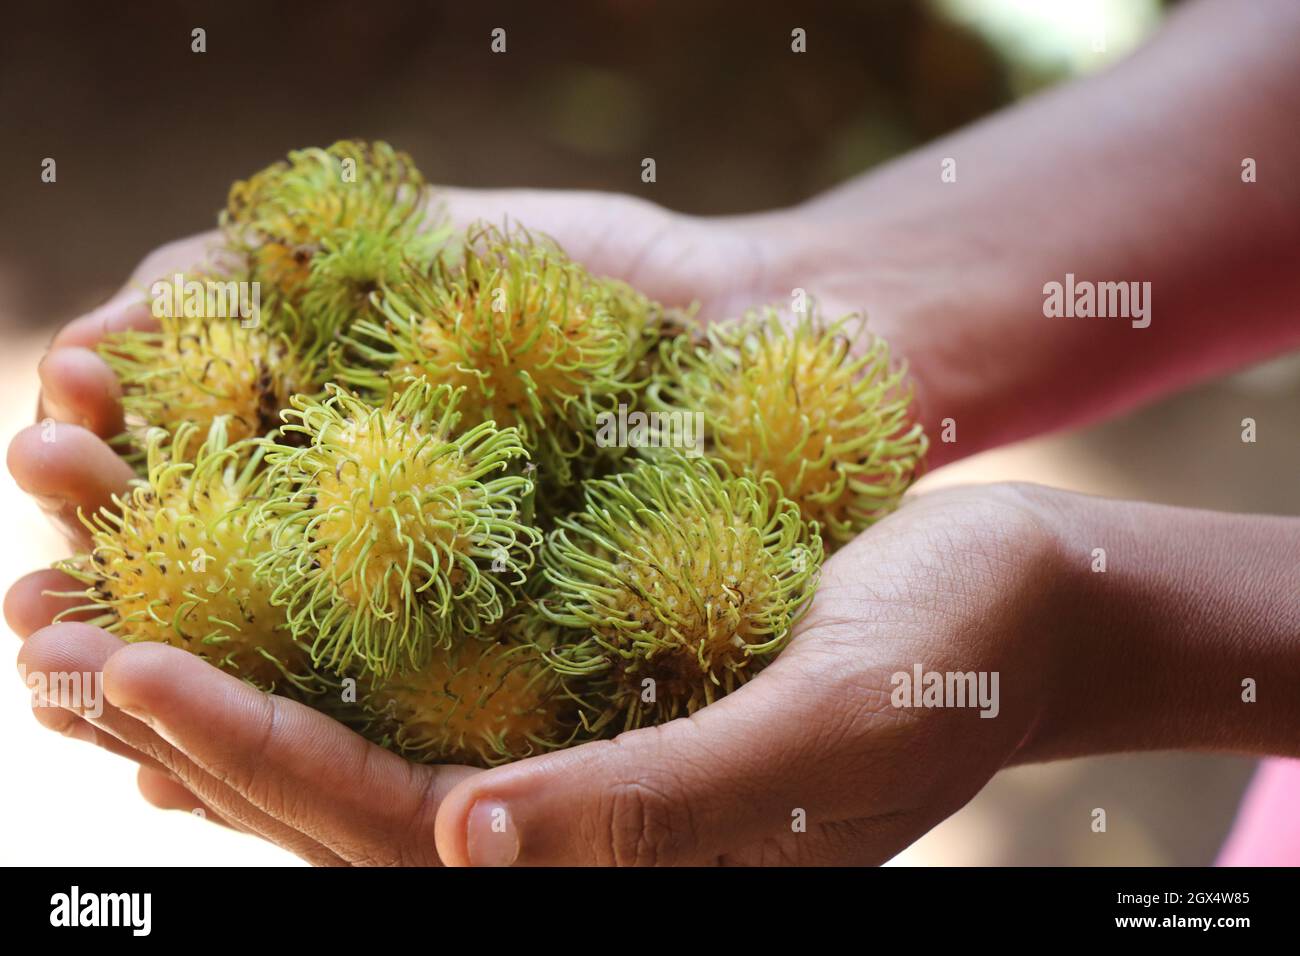 Hand holding a group of rambutan fruit, Tropical fruits harvested, Fresh fruits from the farm Stock Photo